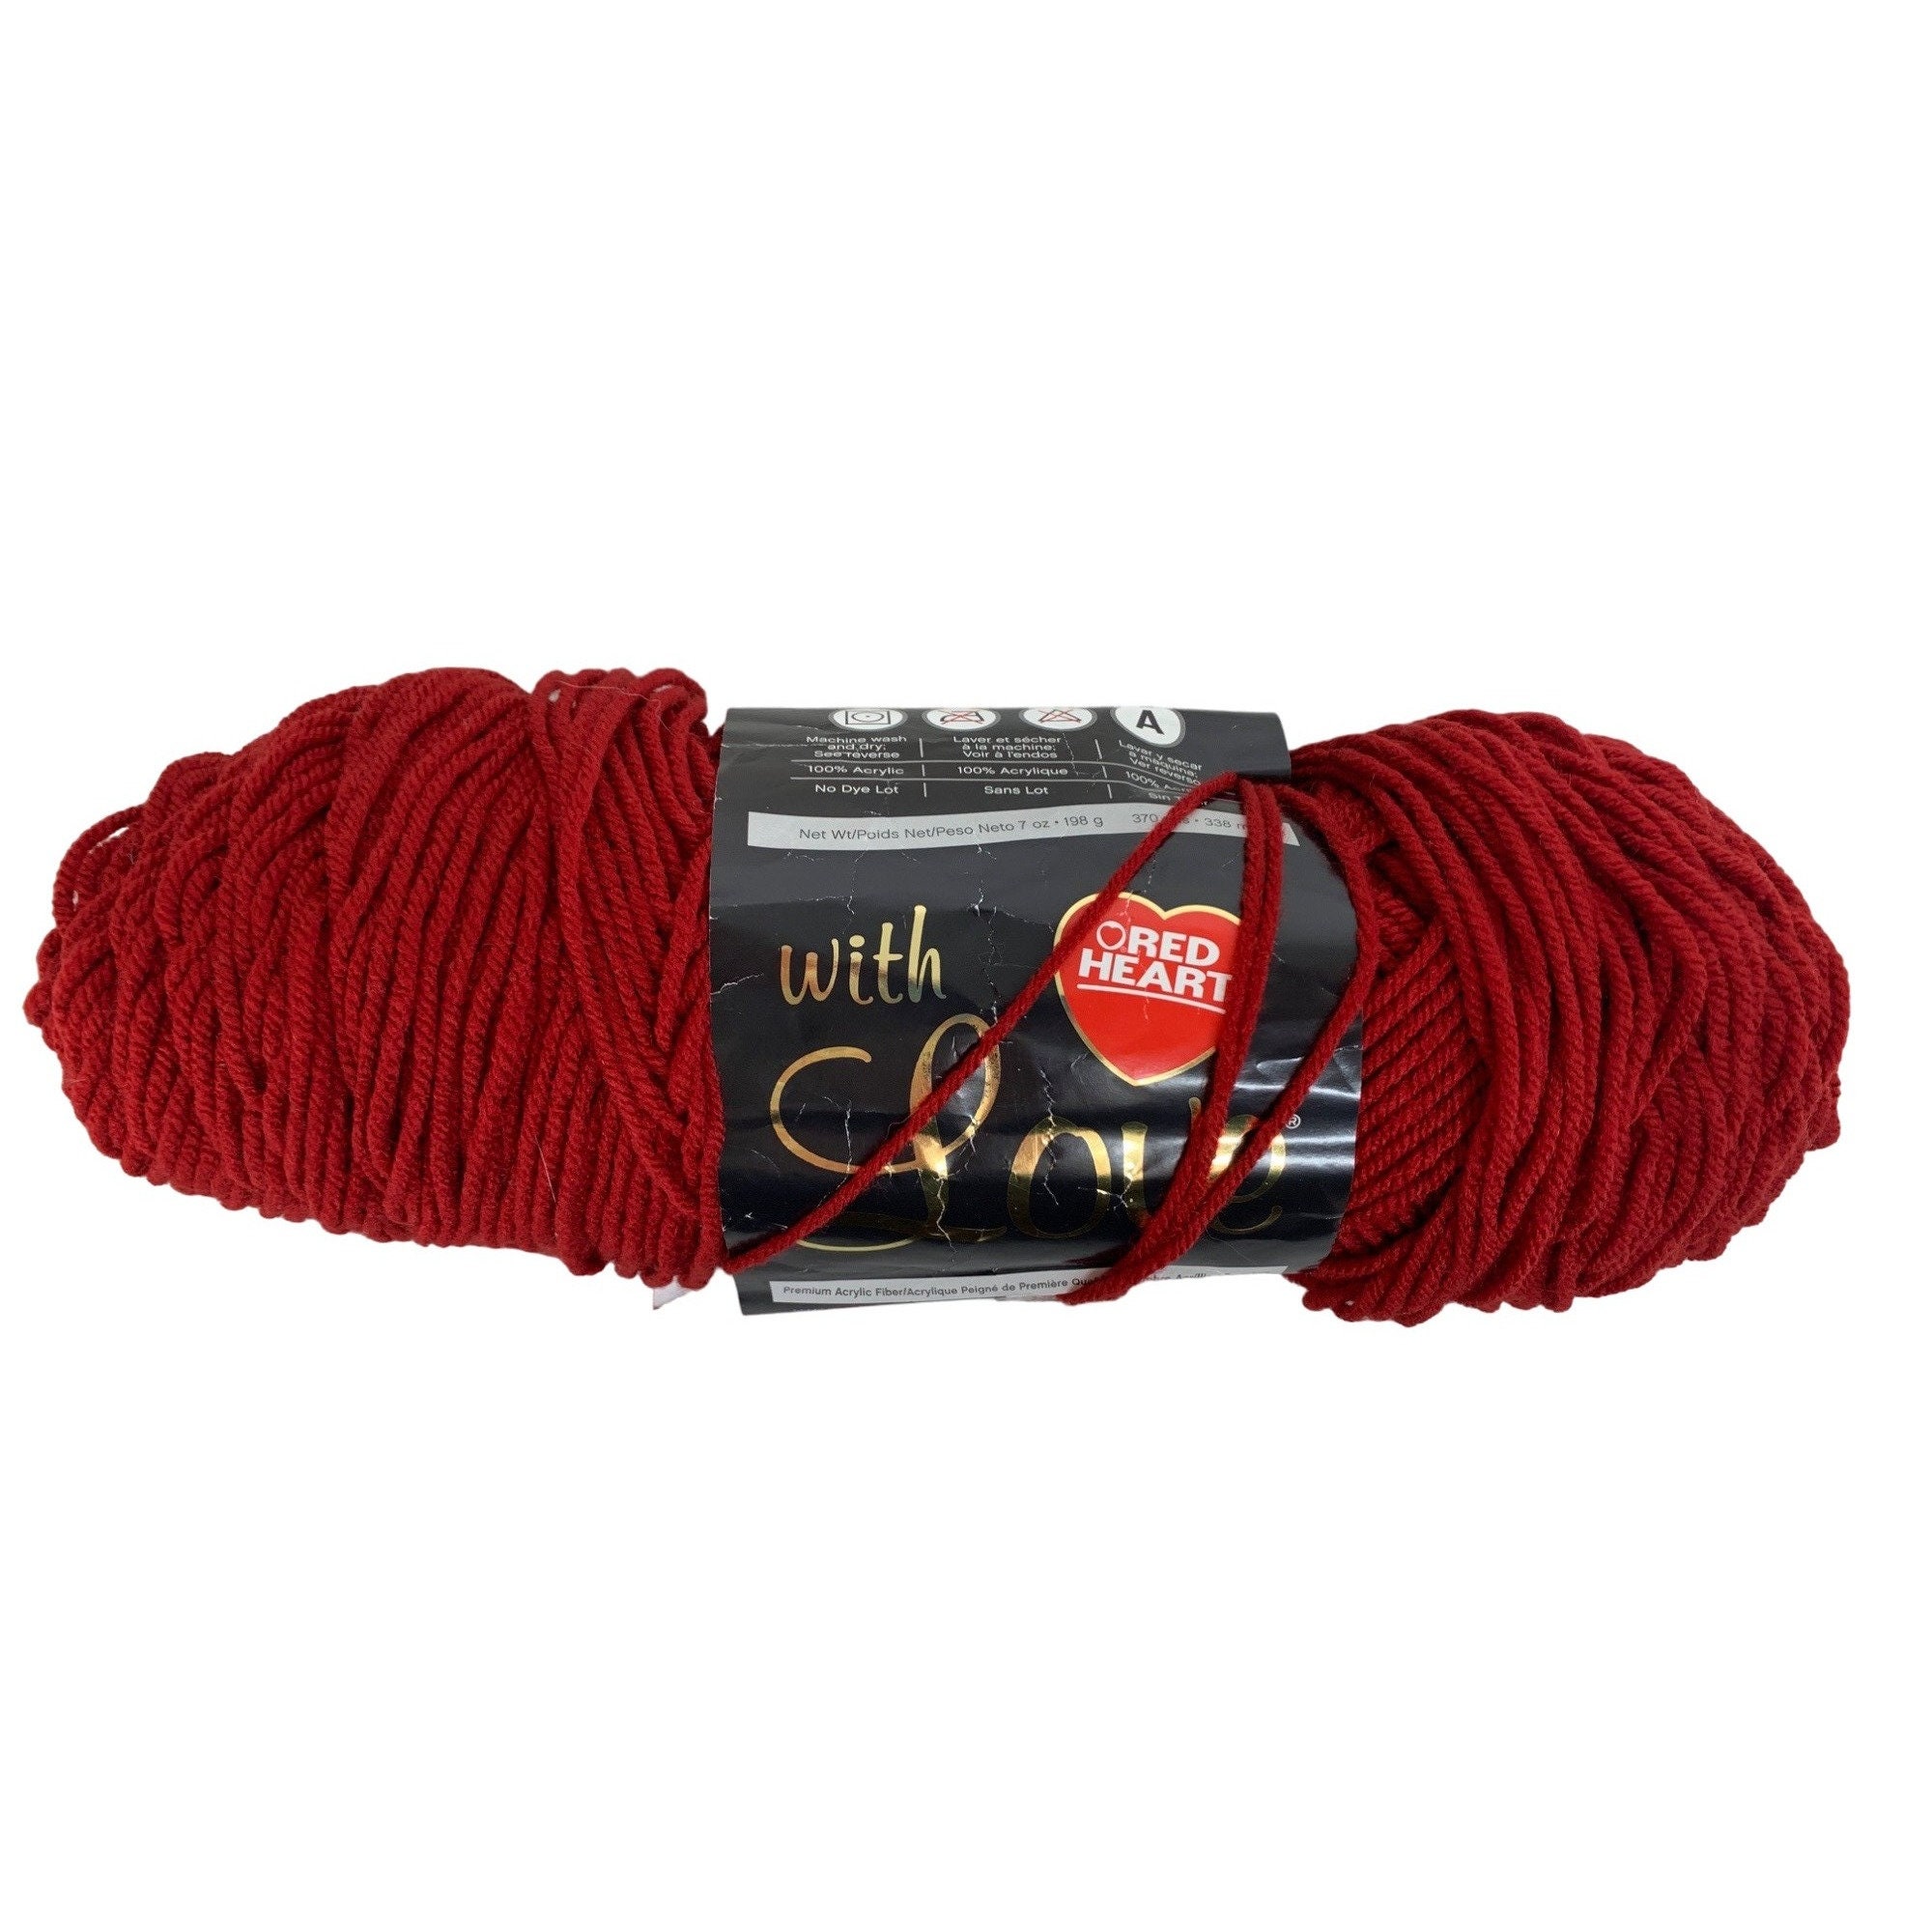  Red Heart with Love Stone Yarn - 3 Pack of 198g/7oz - Acrylic -  4 Medium (Worsted) - 370 Yards - Knitting/Crochet